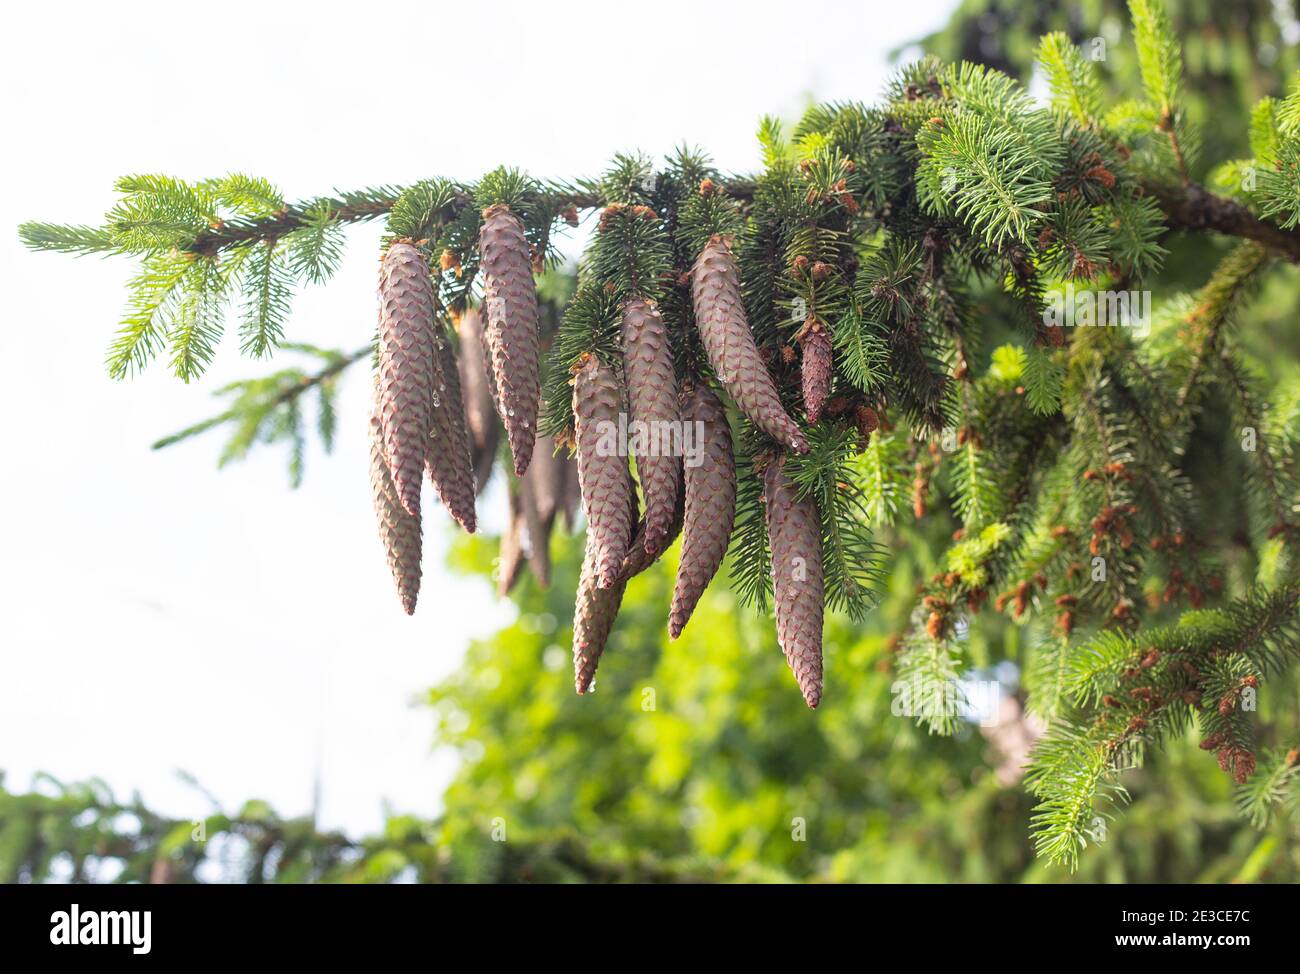 Beautiful large oblong cones on a coniferous taiga tree. Wild nature, healing tree in alternative medicine, background Stock Photo